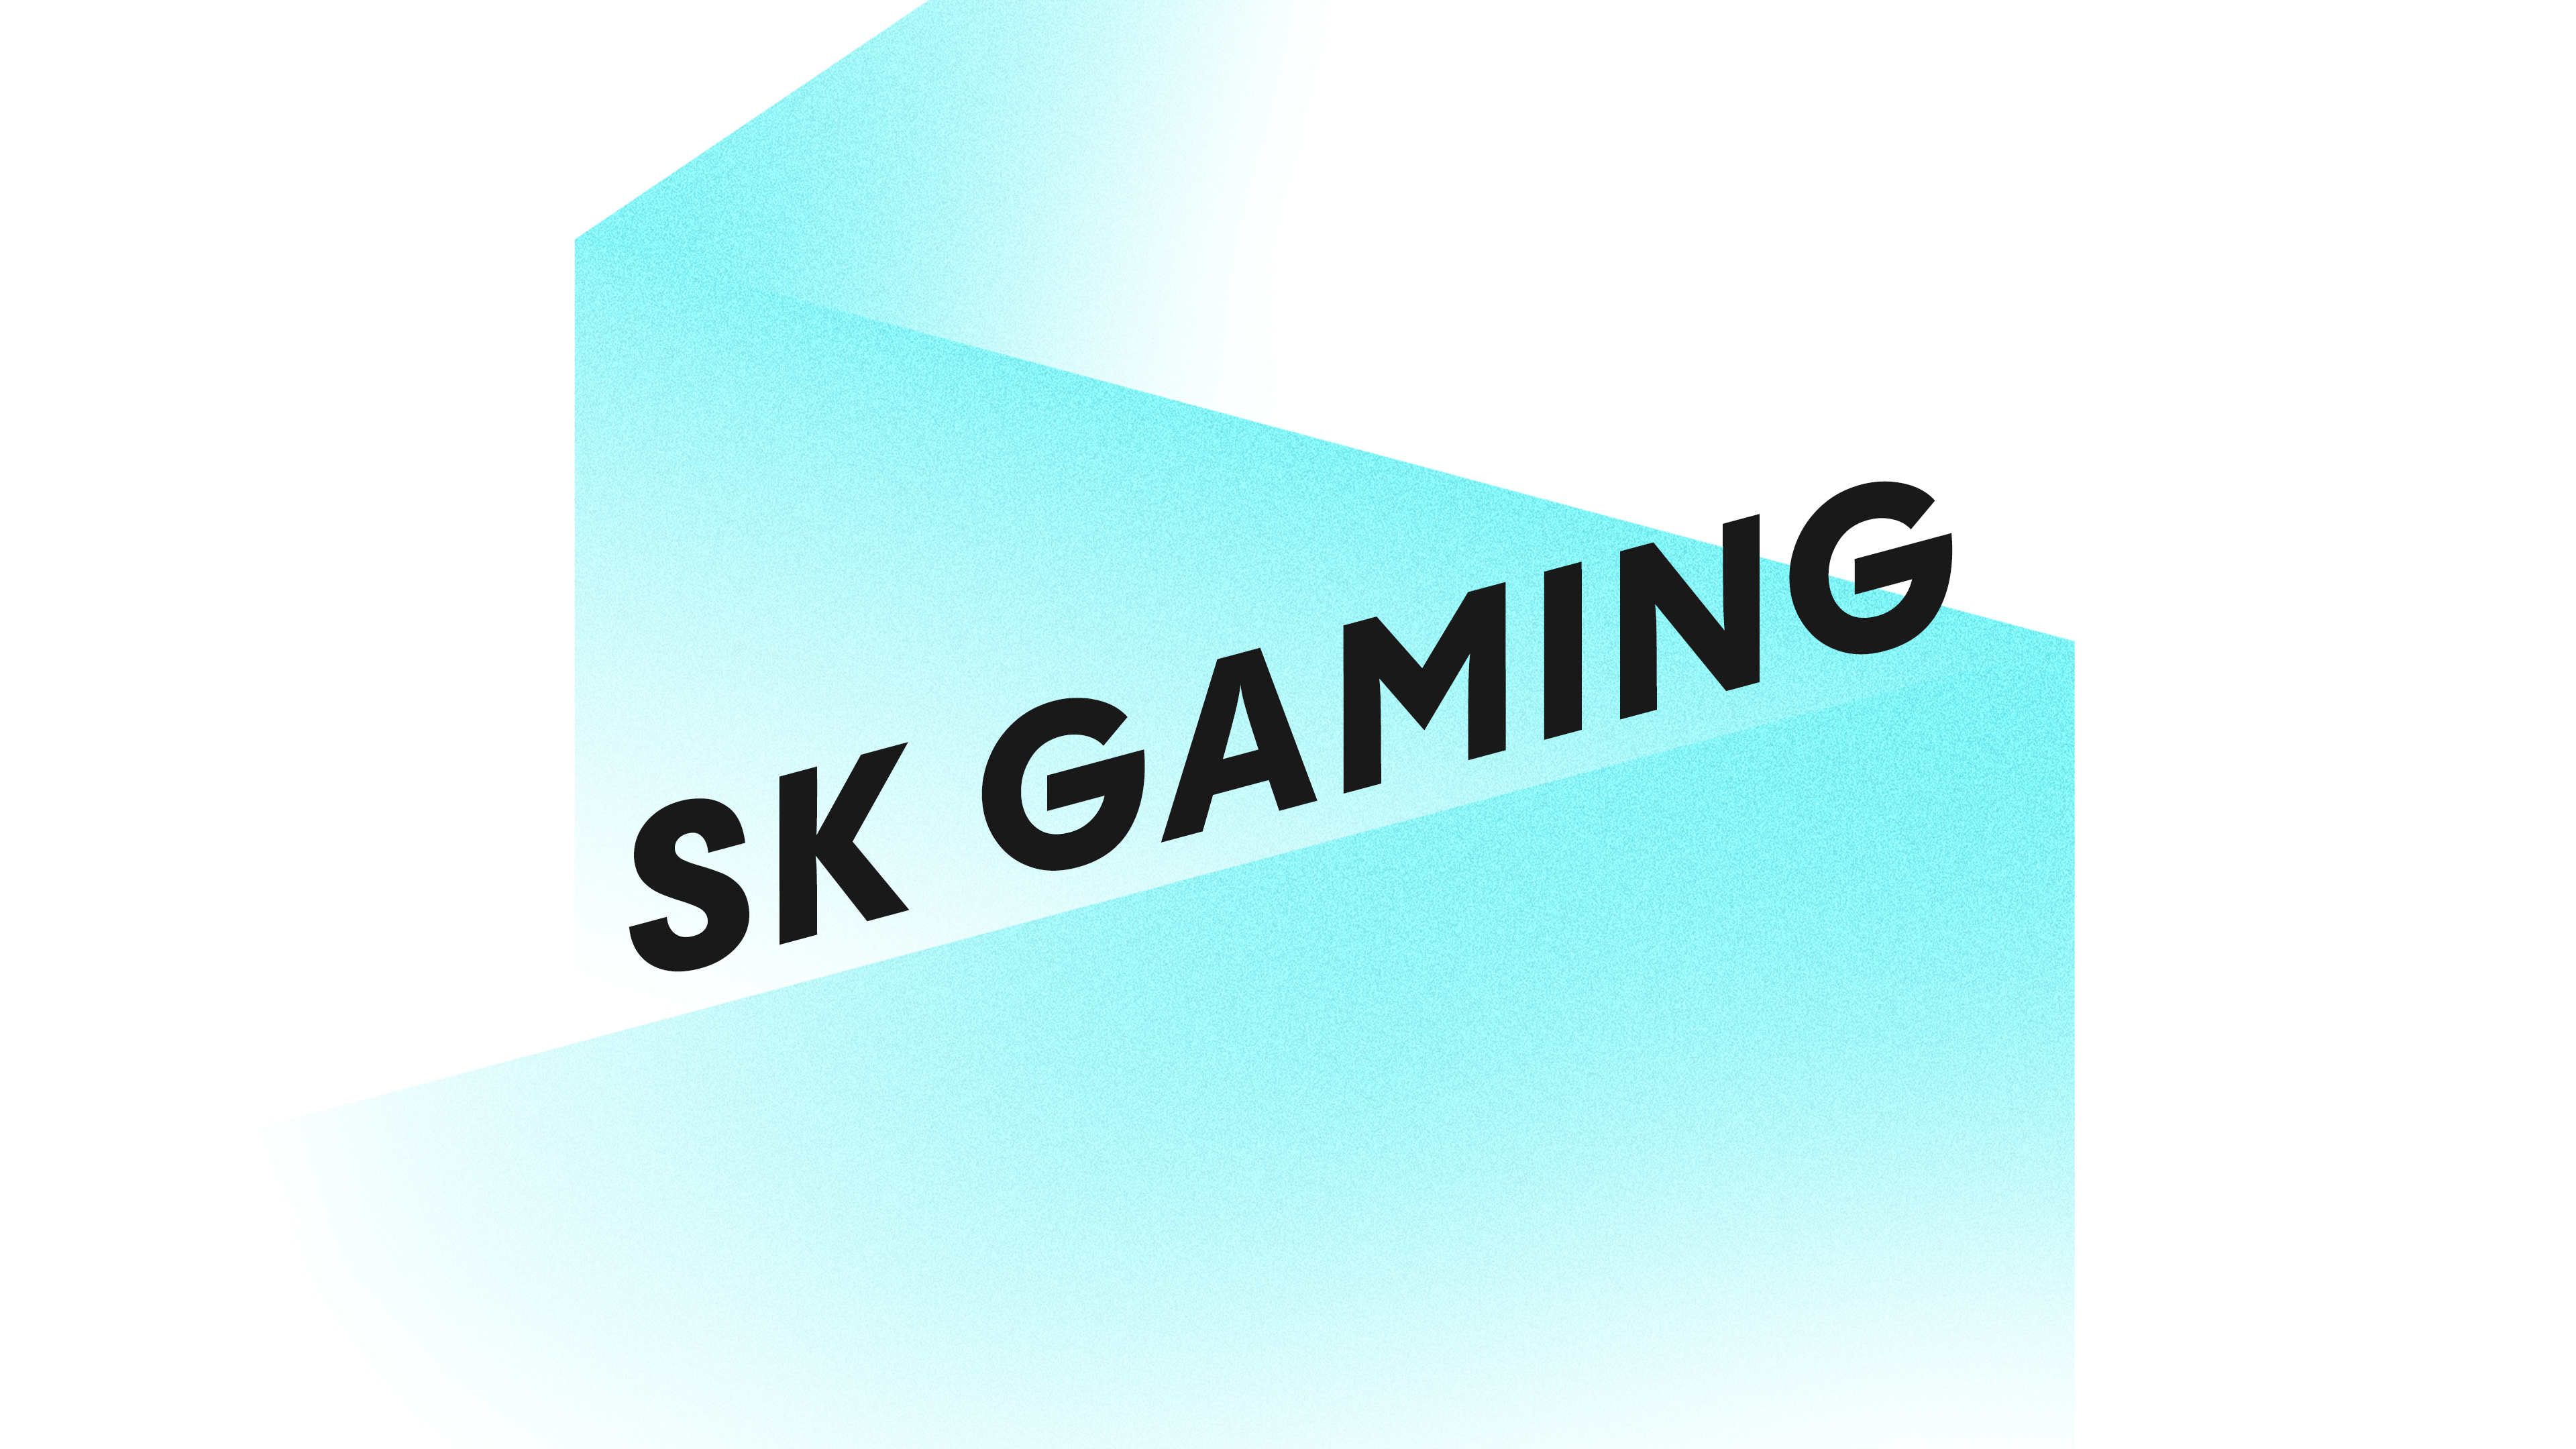 SK wallpaper by Flame Names  Download on ZEDGE  1fca